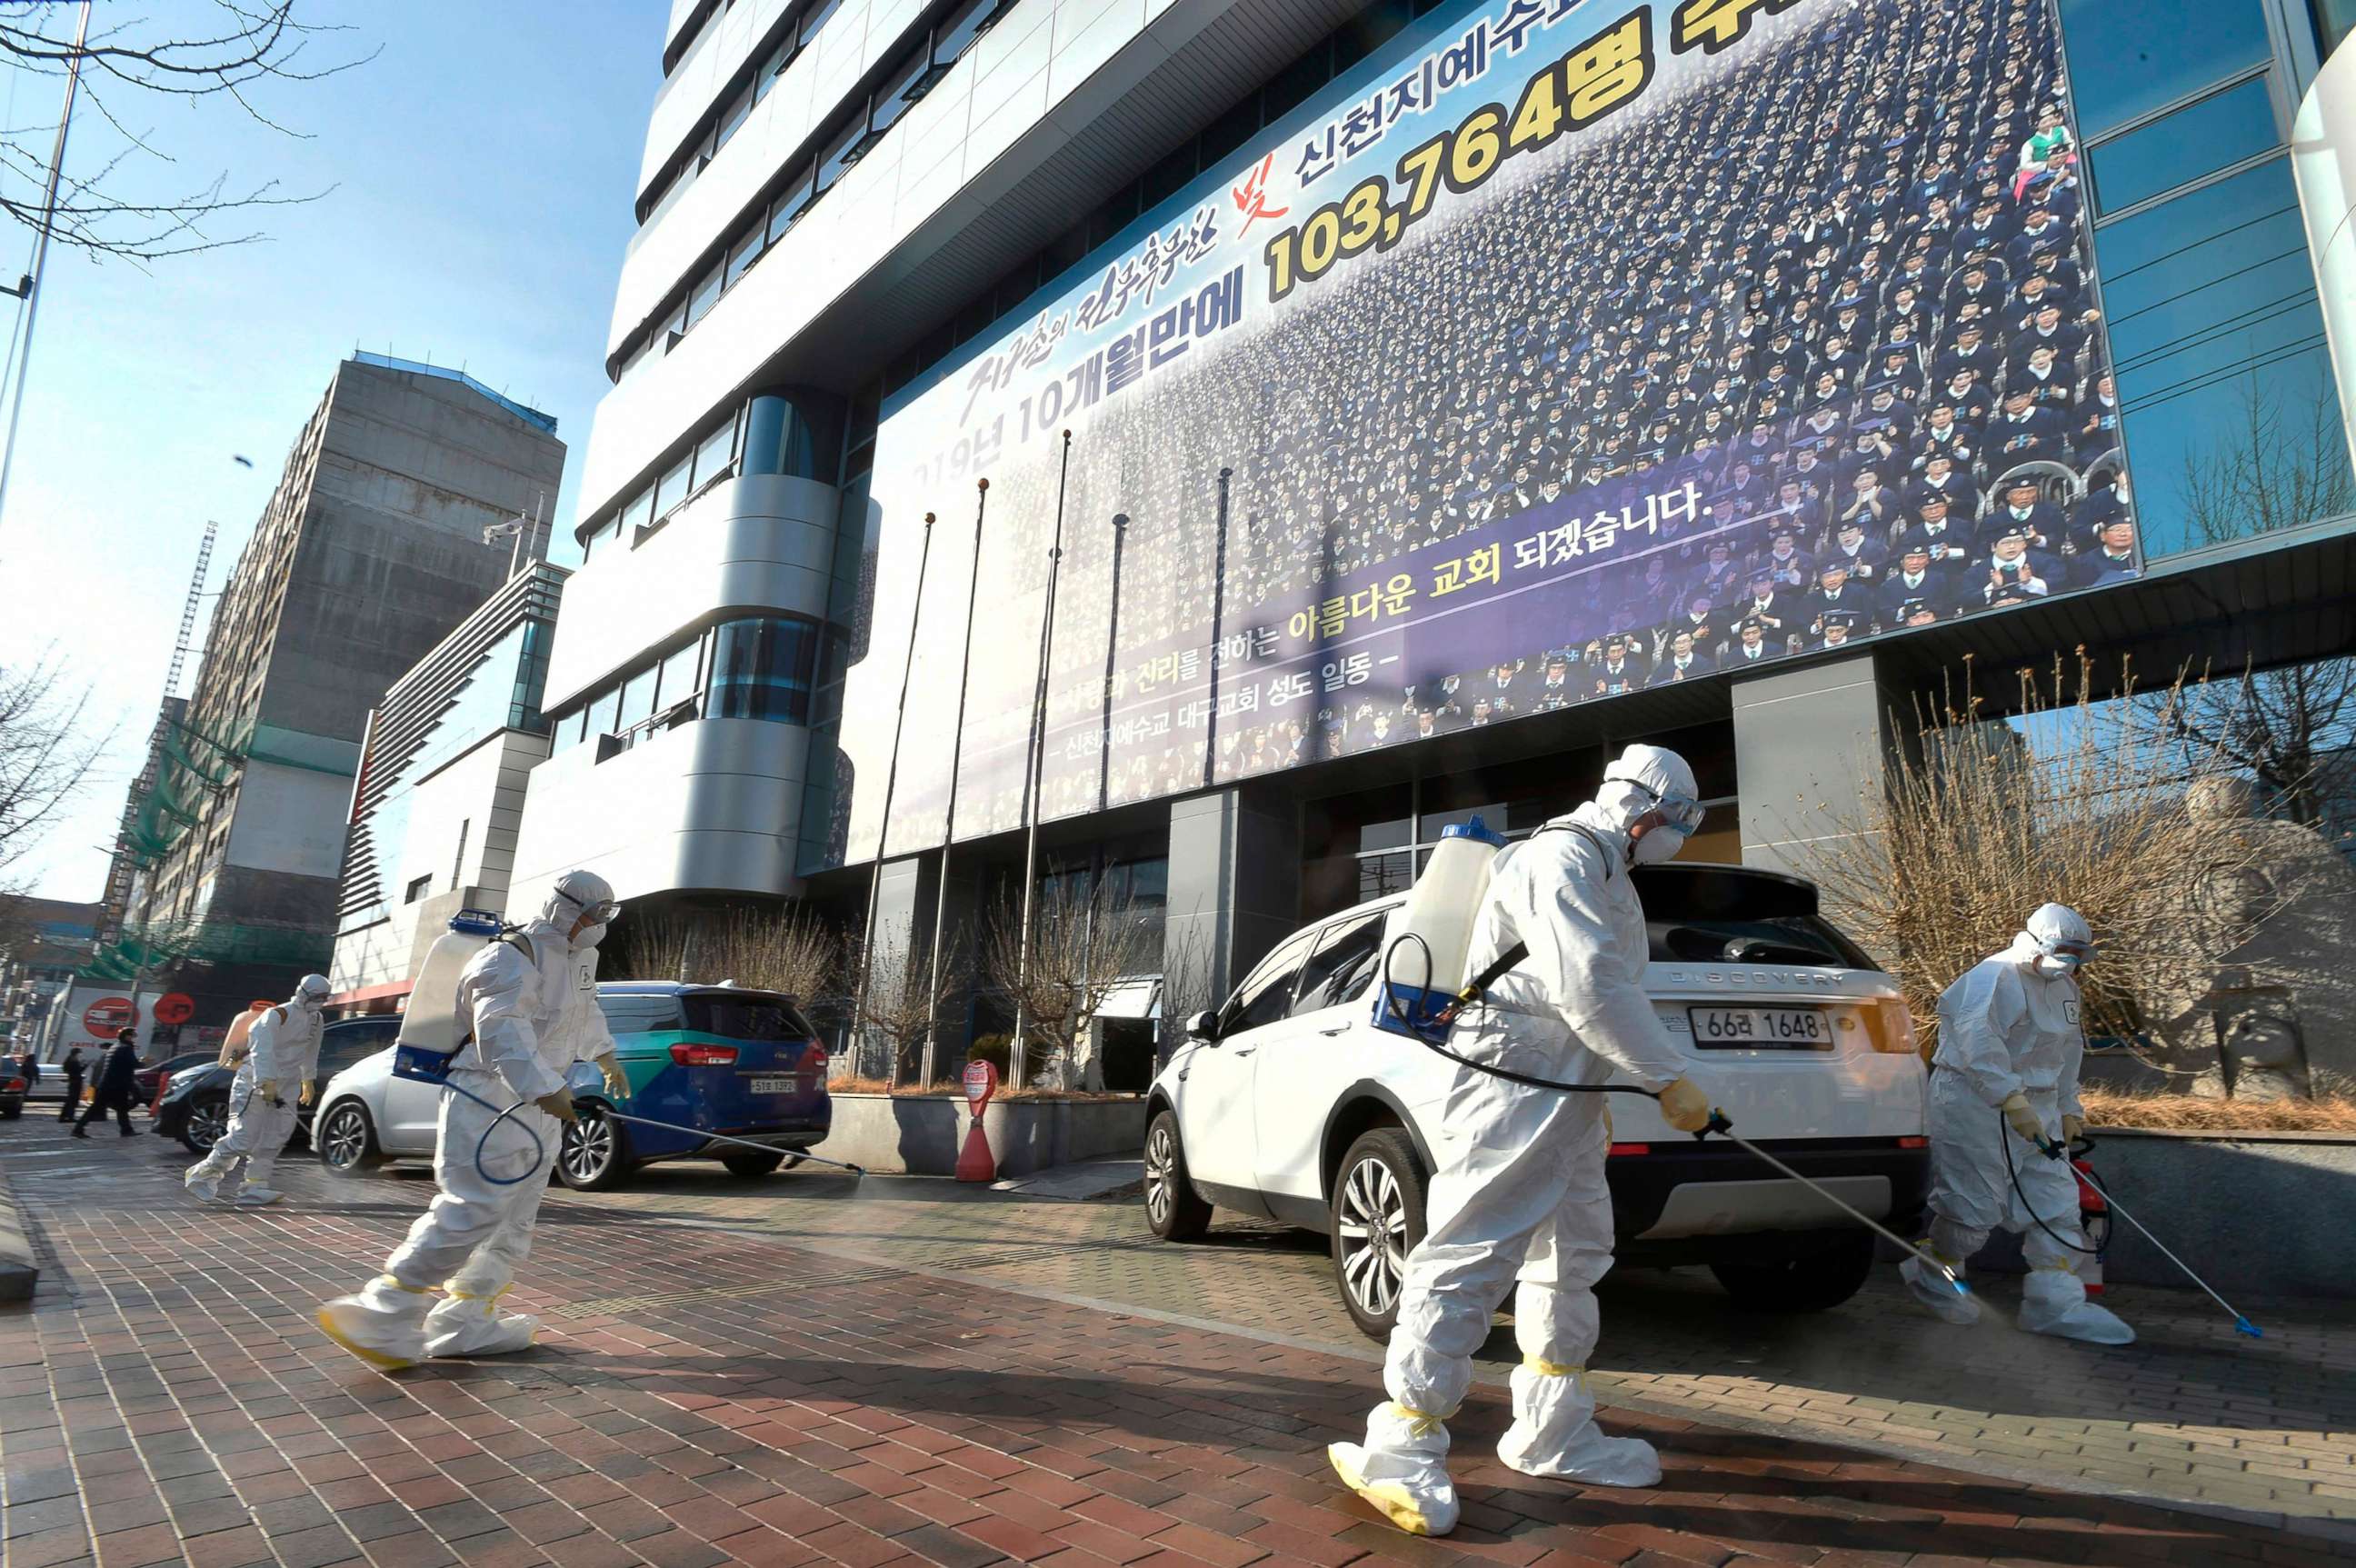 PHOTO: This picture taken on February 19, 2020 shows South Korean health officials spray disinfectant near Shincheonji Church of Jesus in the southeastern city of Daegu on Feb. 19, 2020, after a number of churchgoers were identified as having COVID-19.